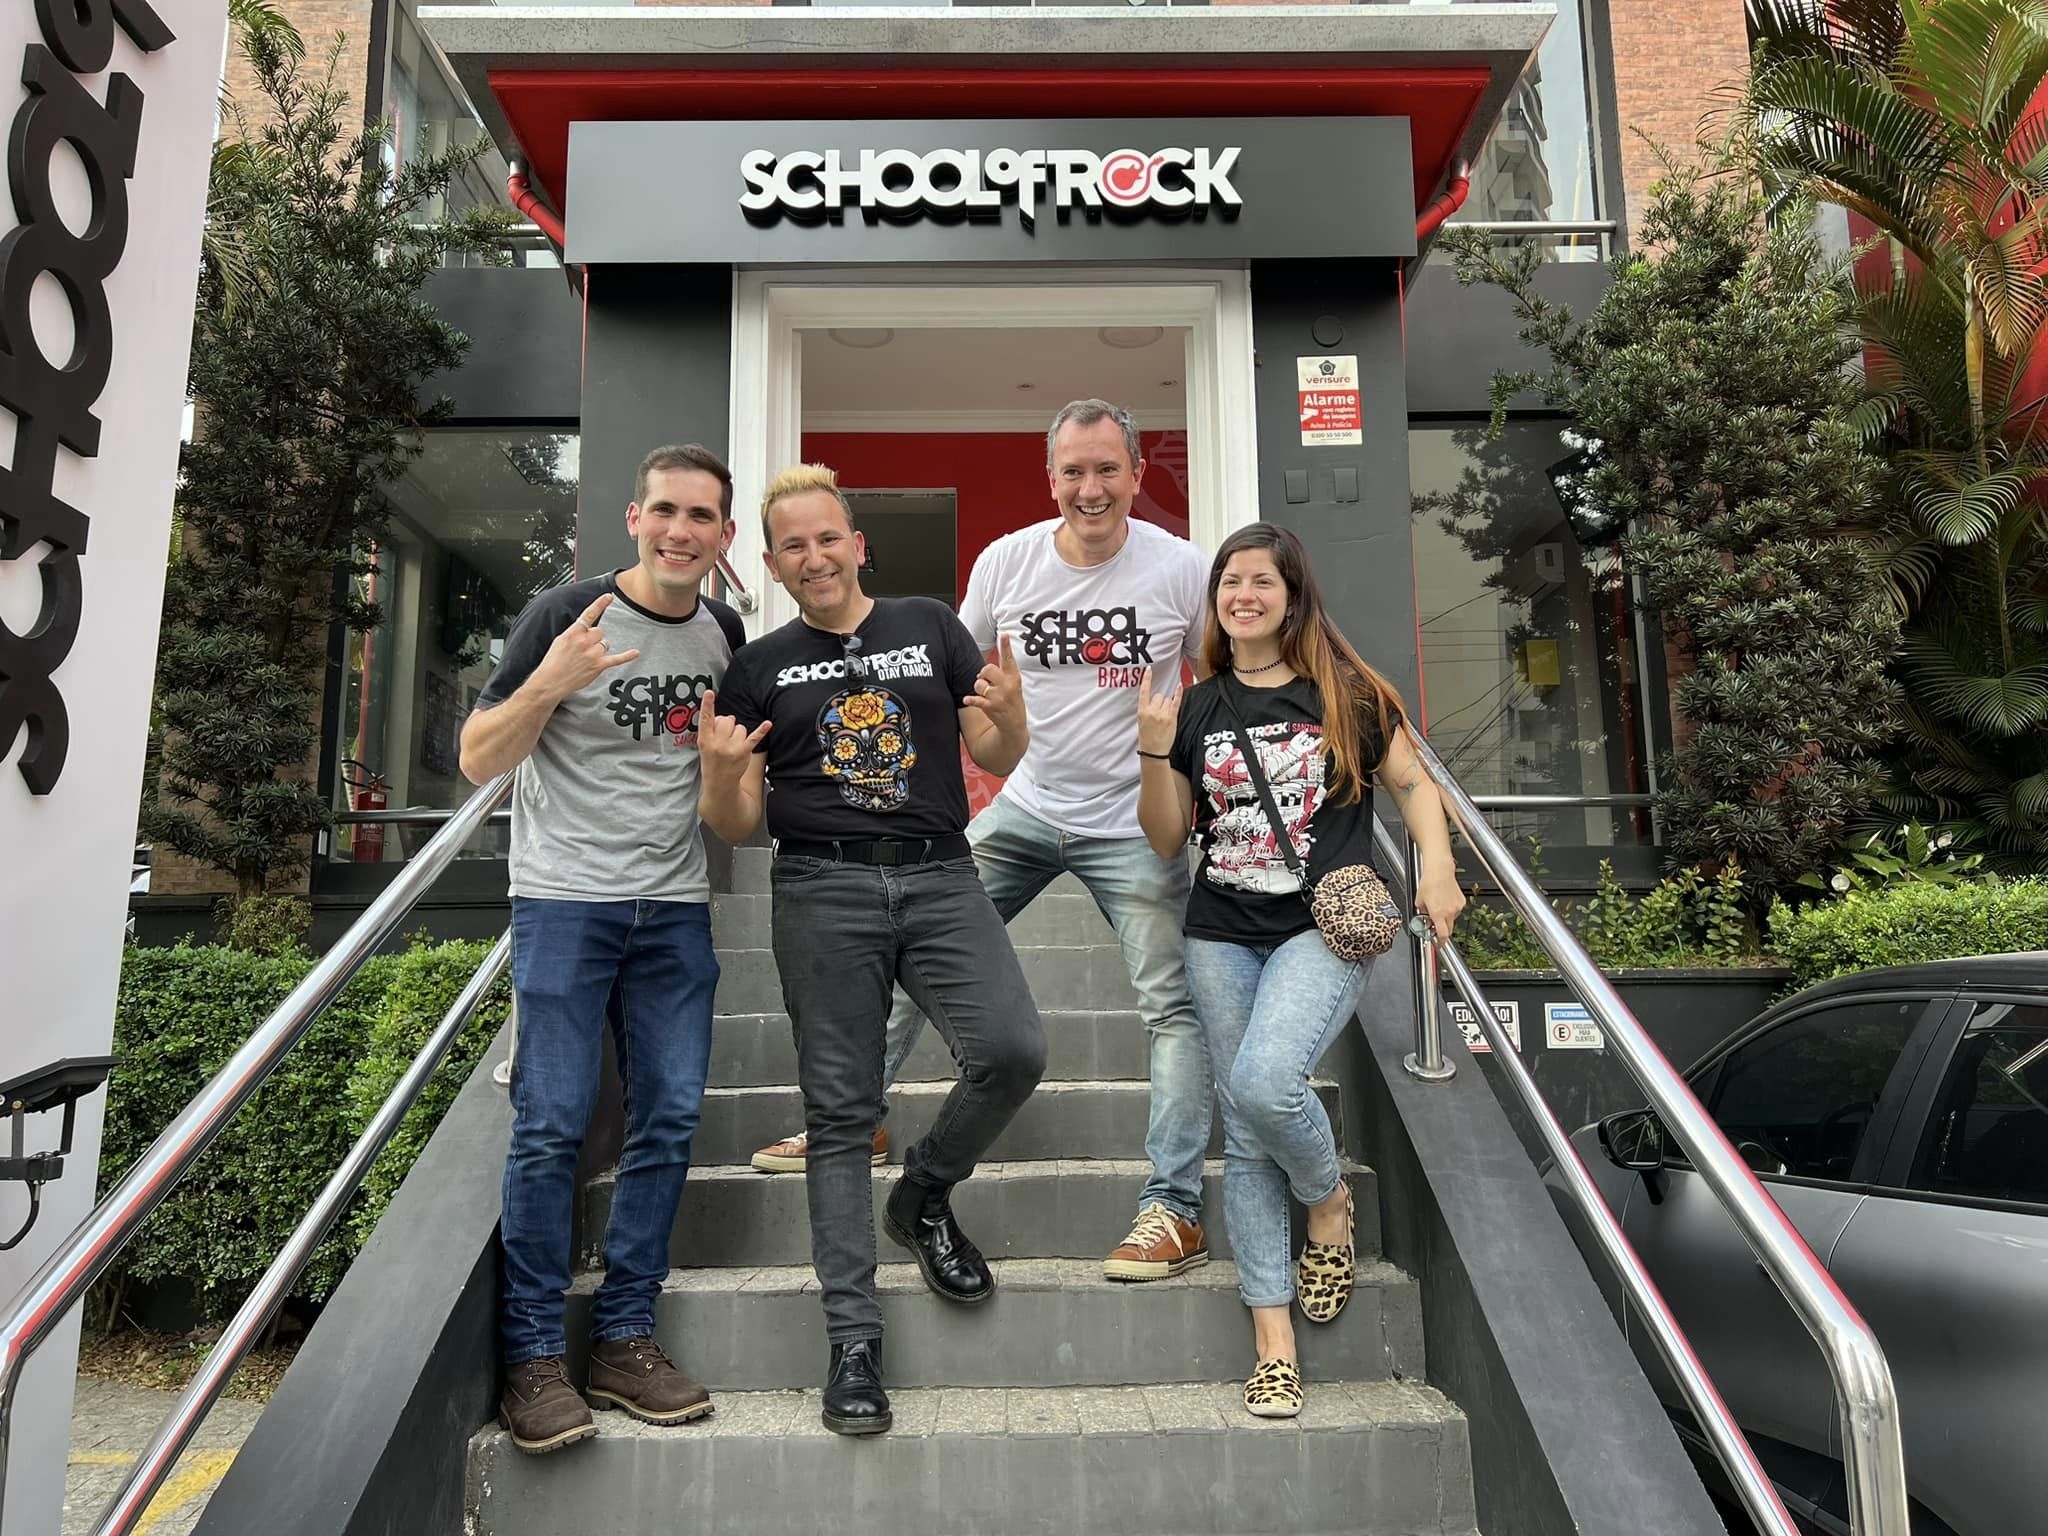 School of Rock CEO Rob Price visiting with the School of Rock Brasil team